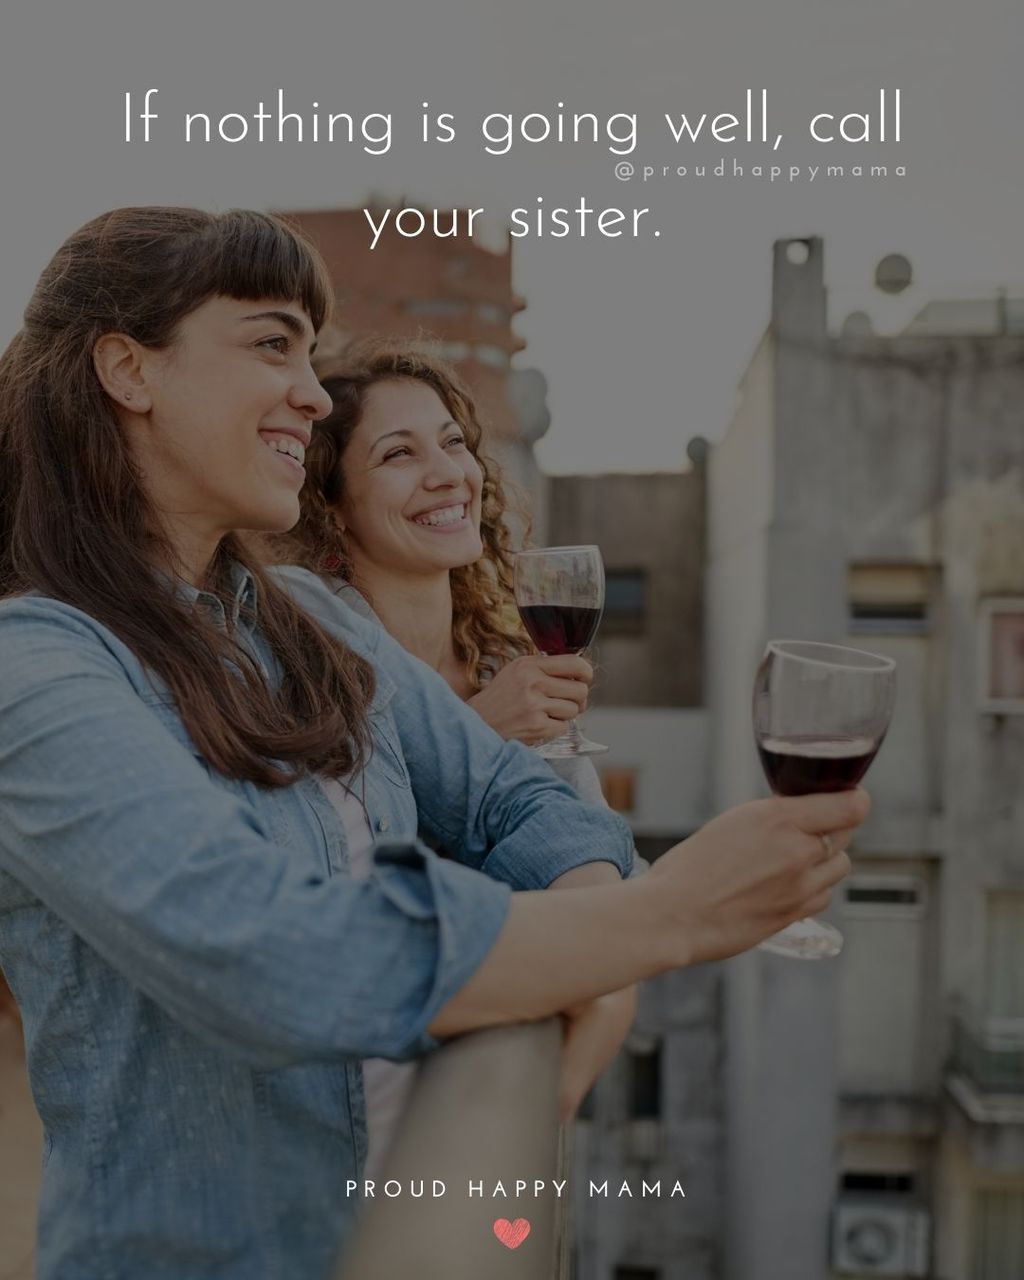 Sister Quotes - If nothing is going well, call your sister.